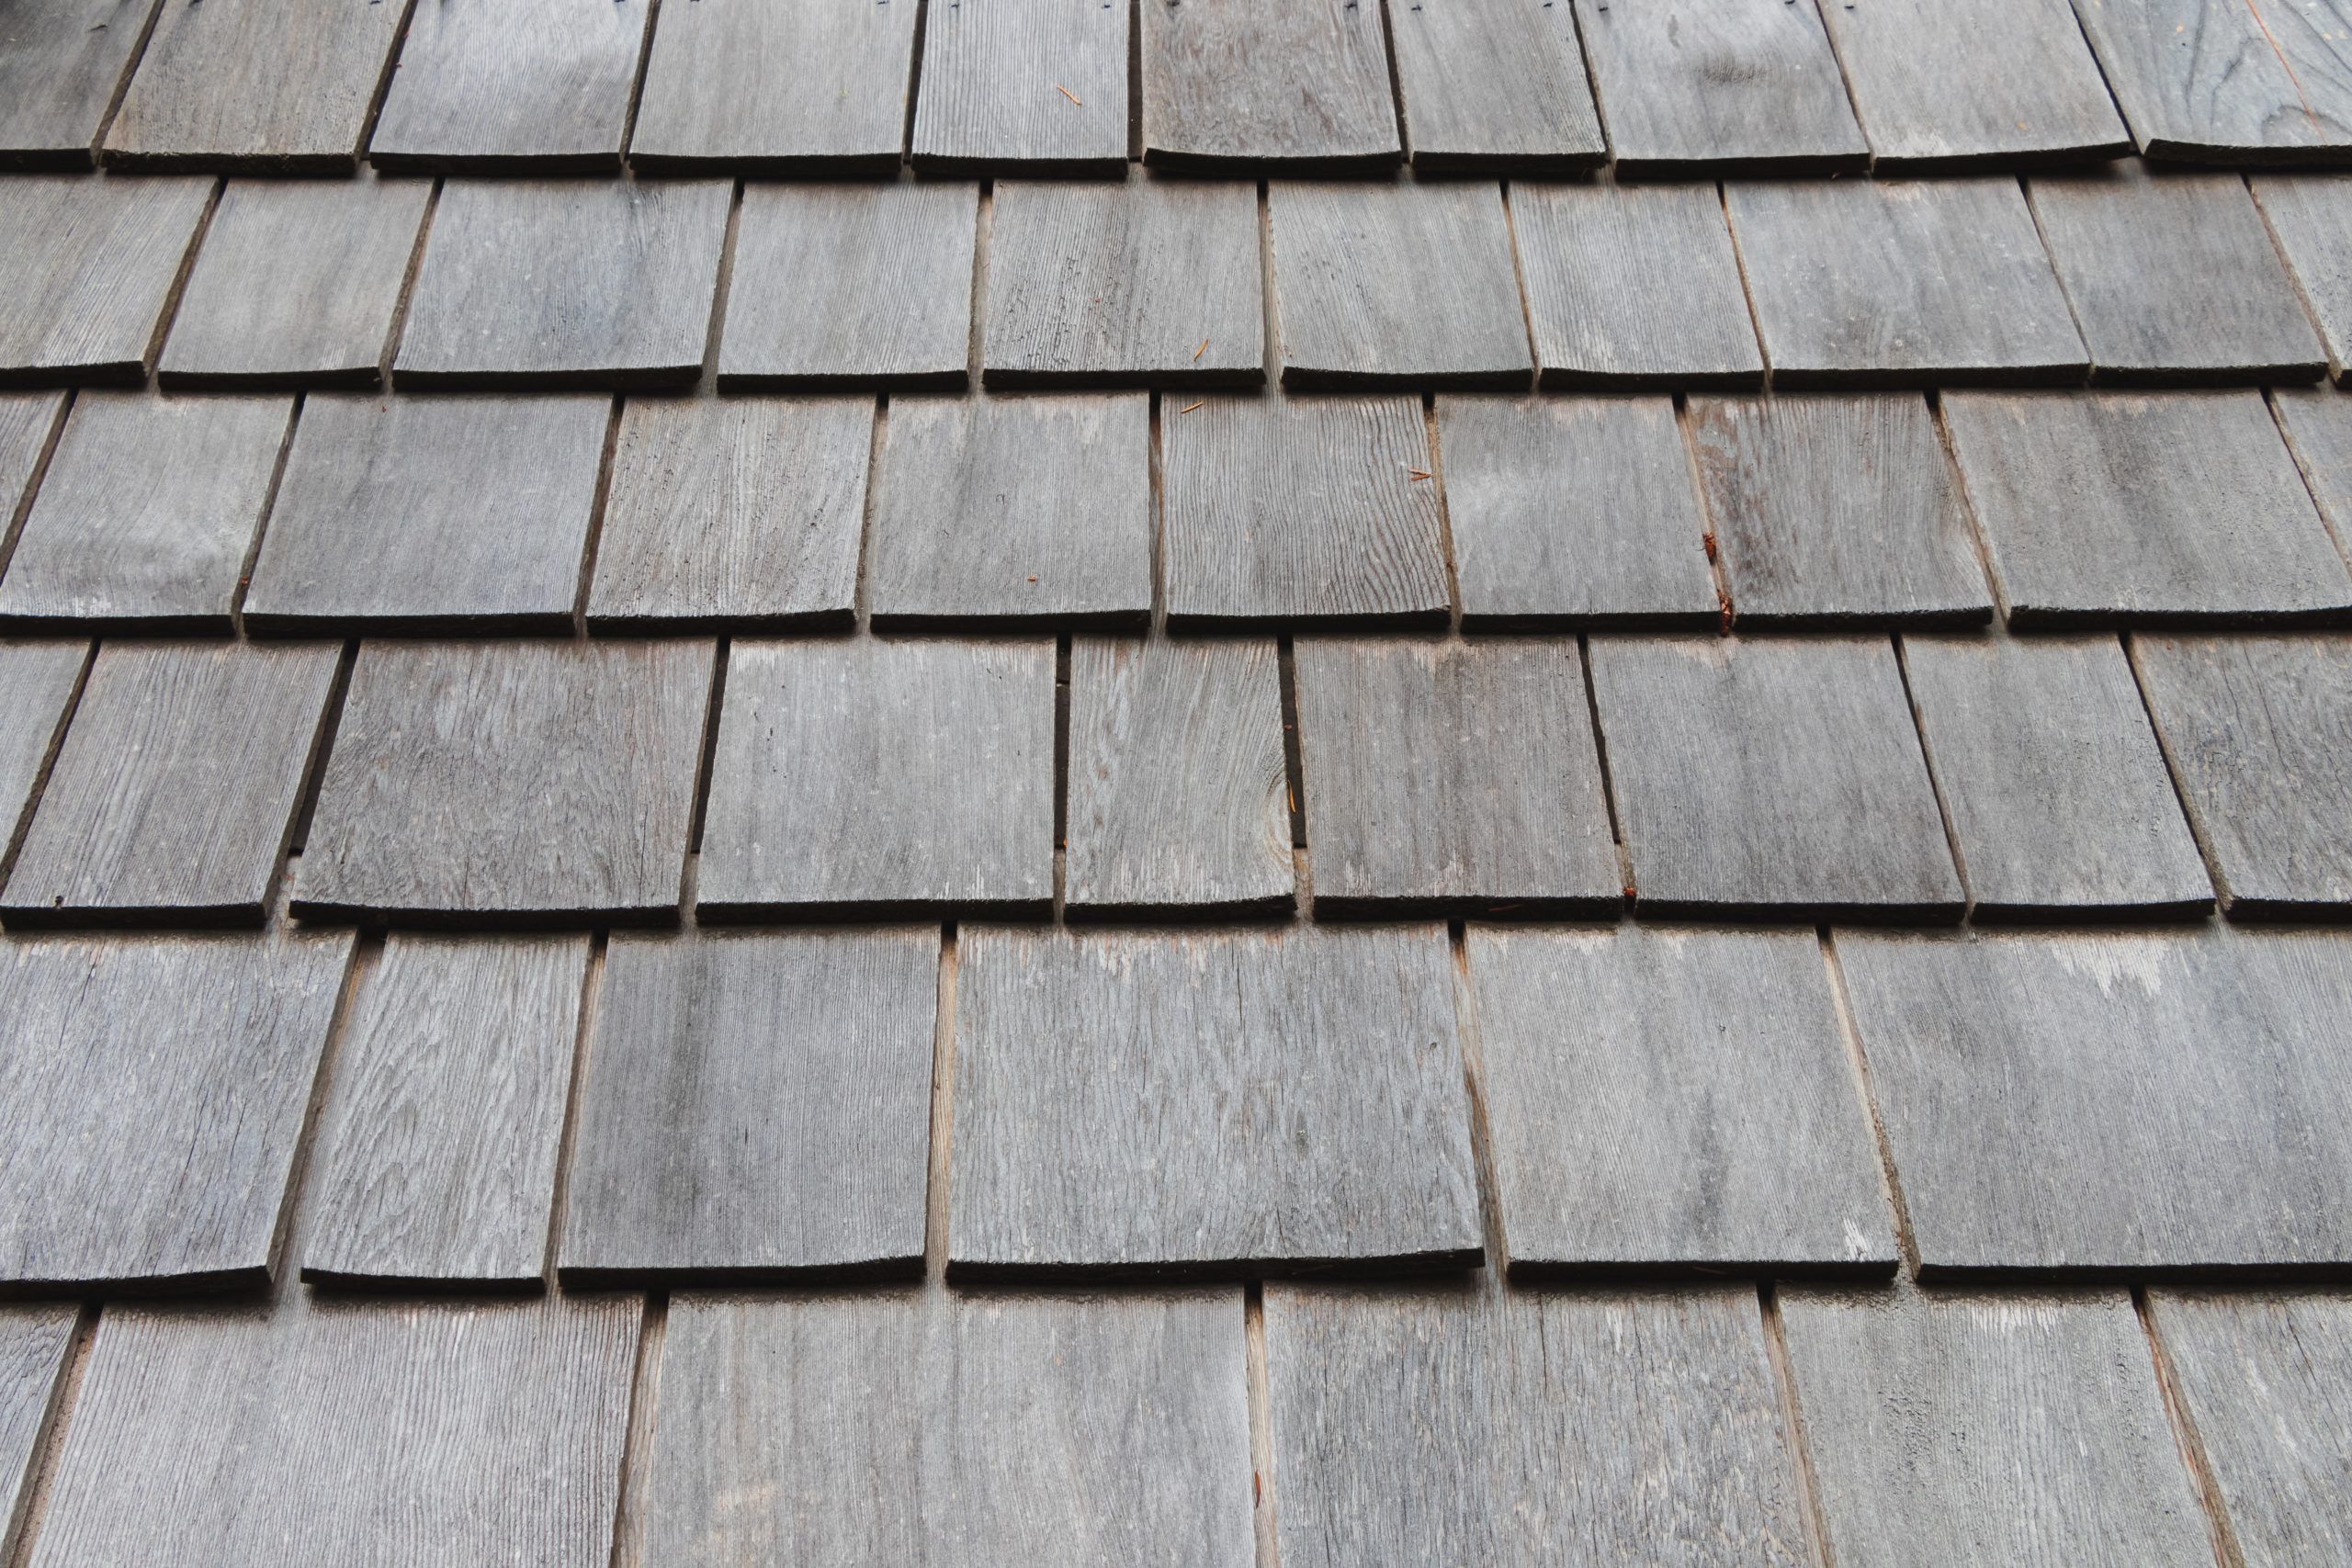 A Beginner’s Guide to Shingle Roofing